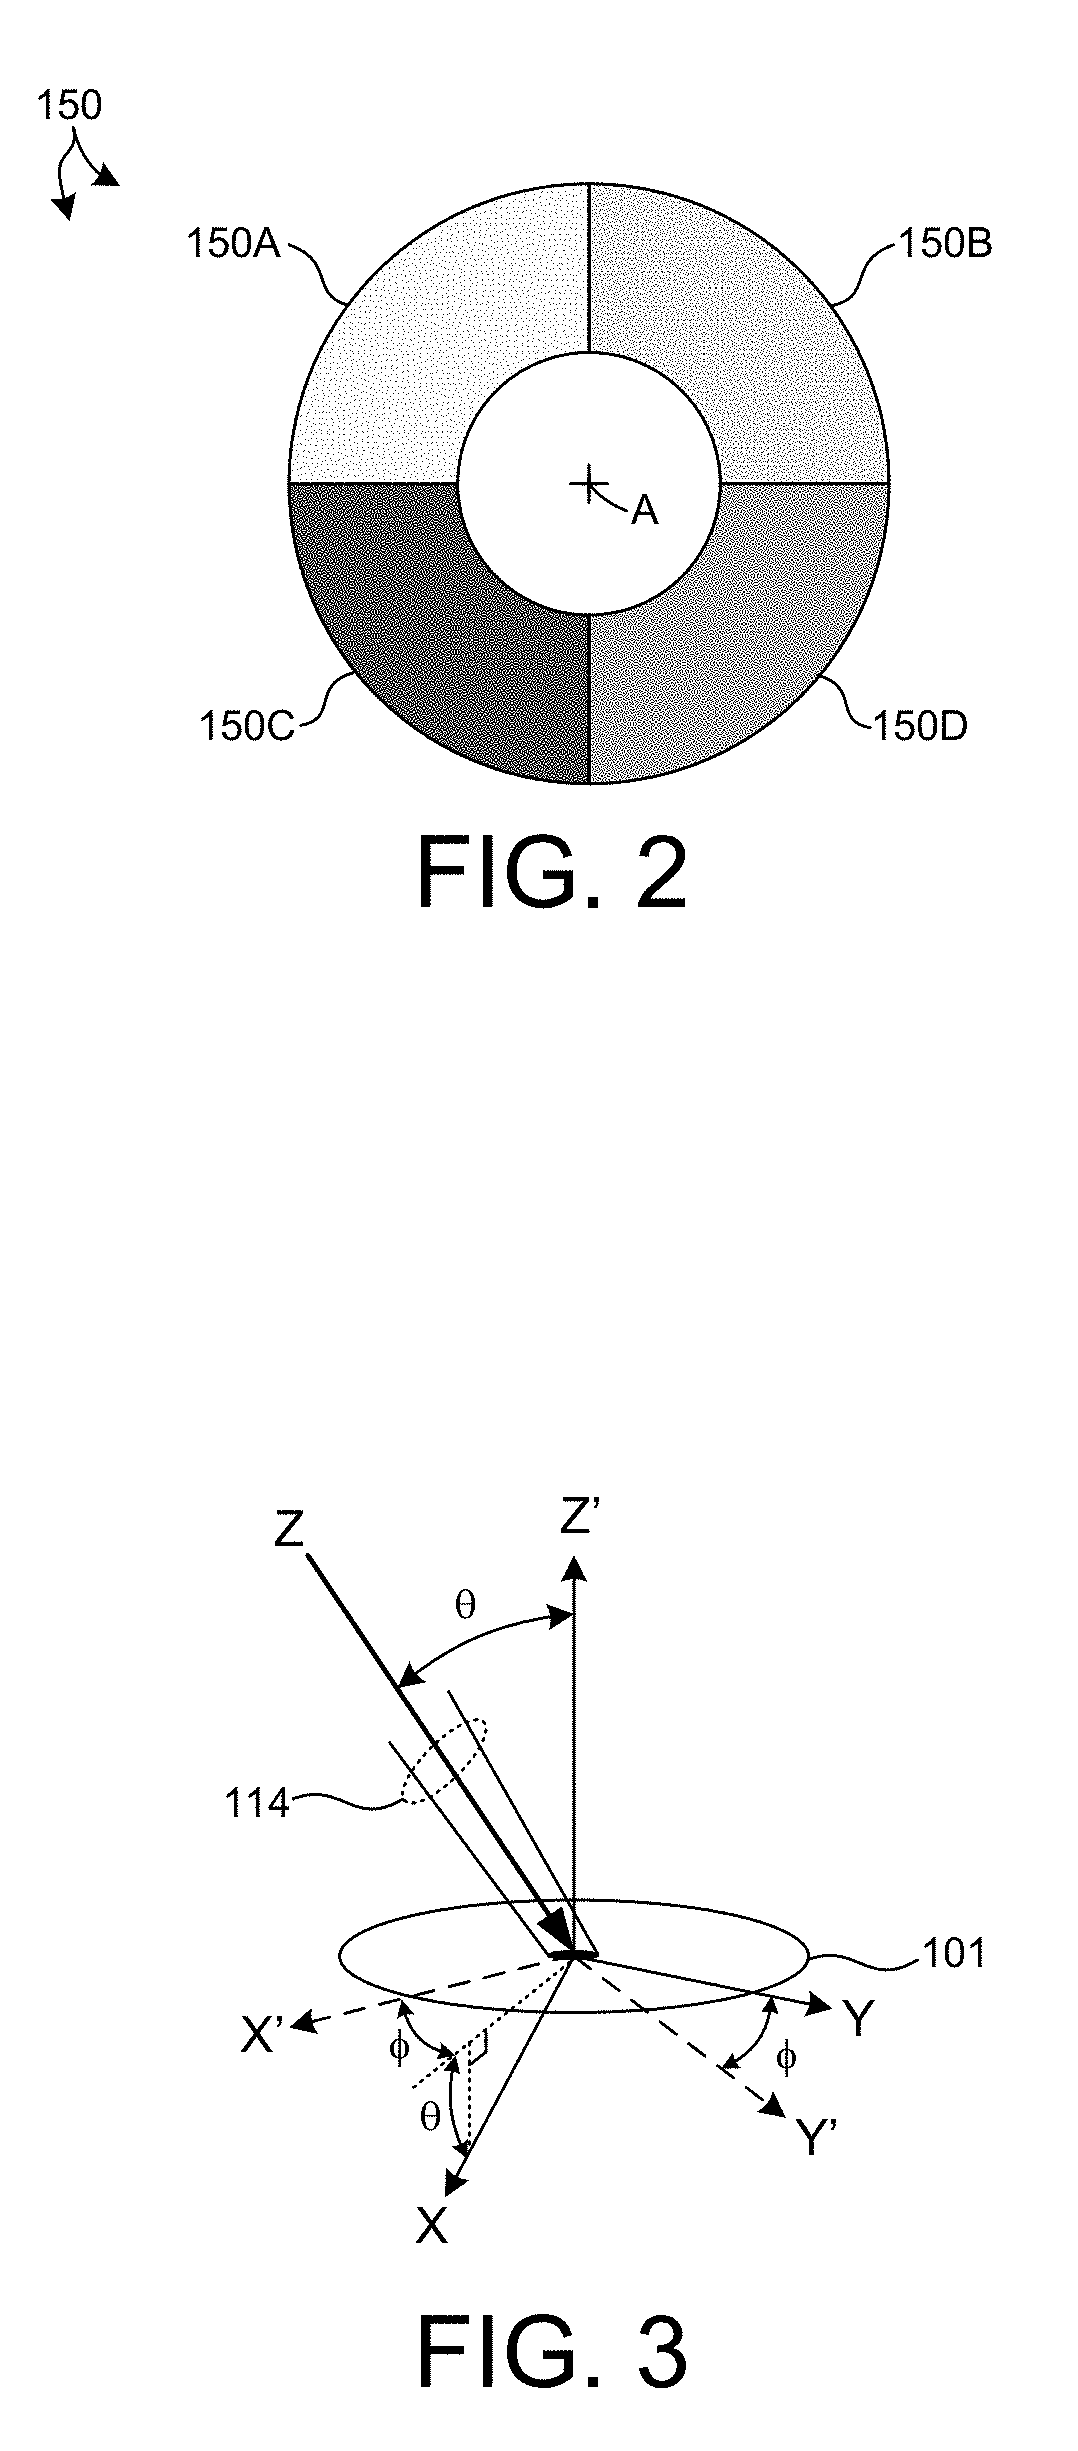 Methods And Systems For Semiconductor Metrology Based On Polychromatic Soft X-Ray Diffraction